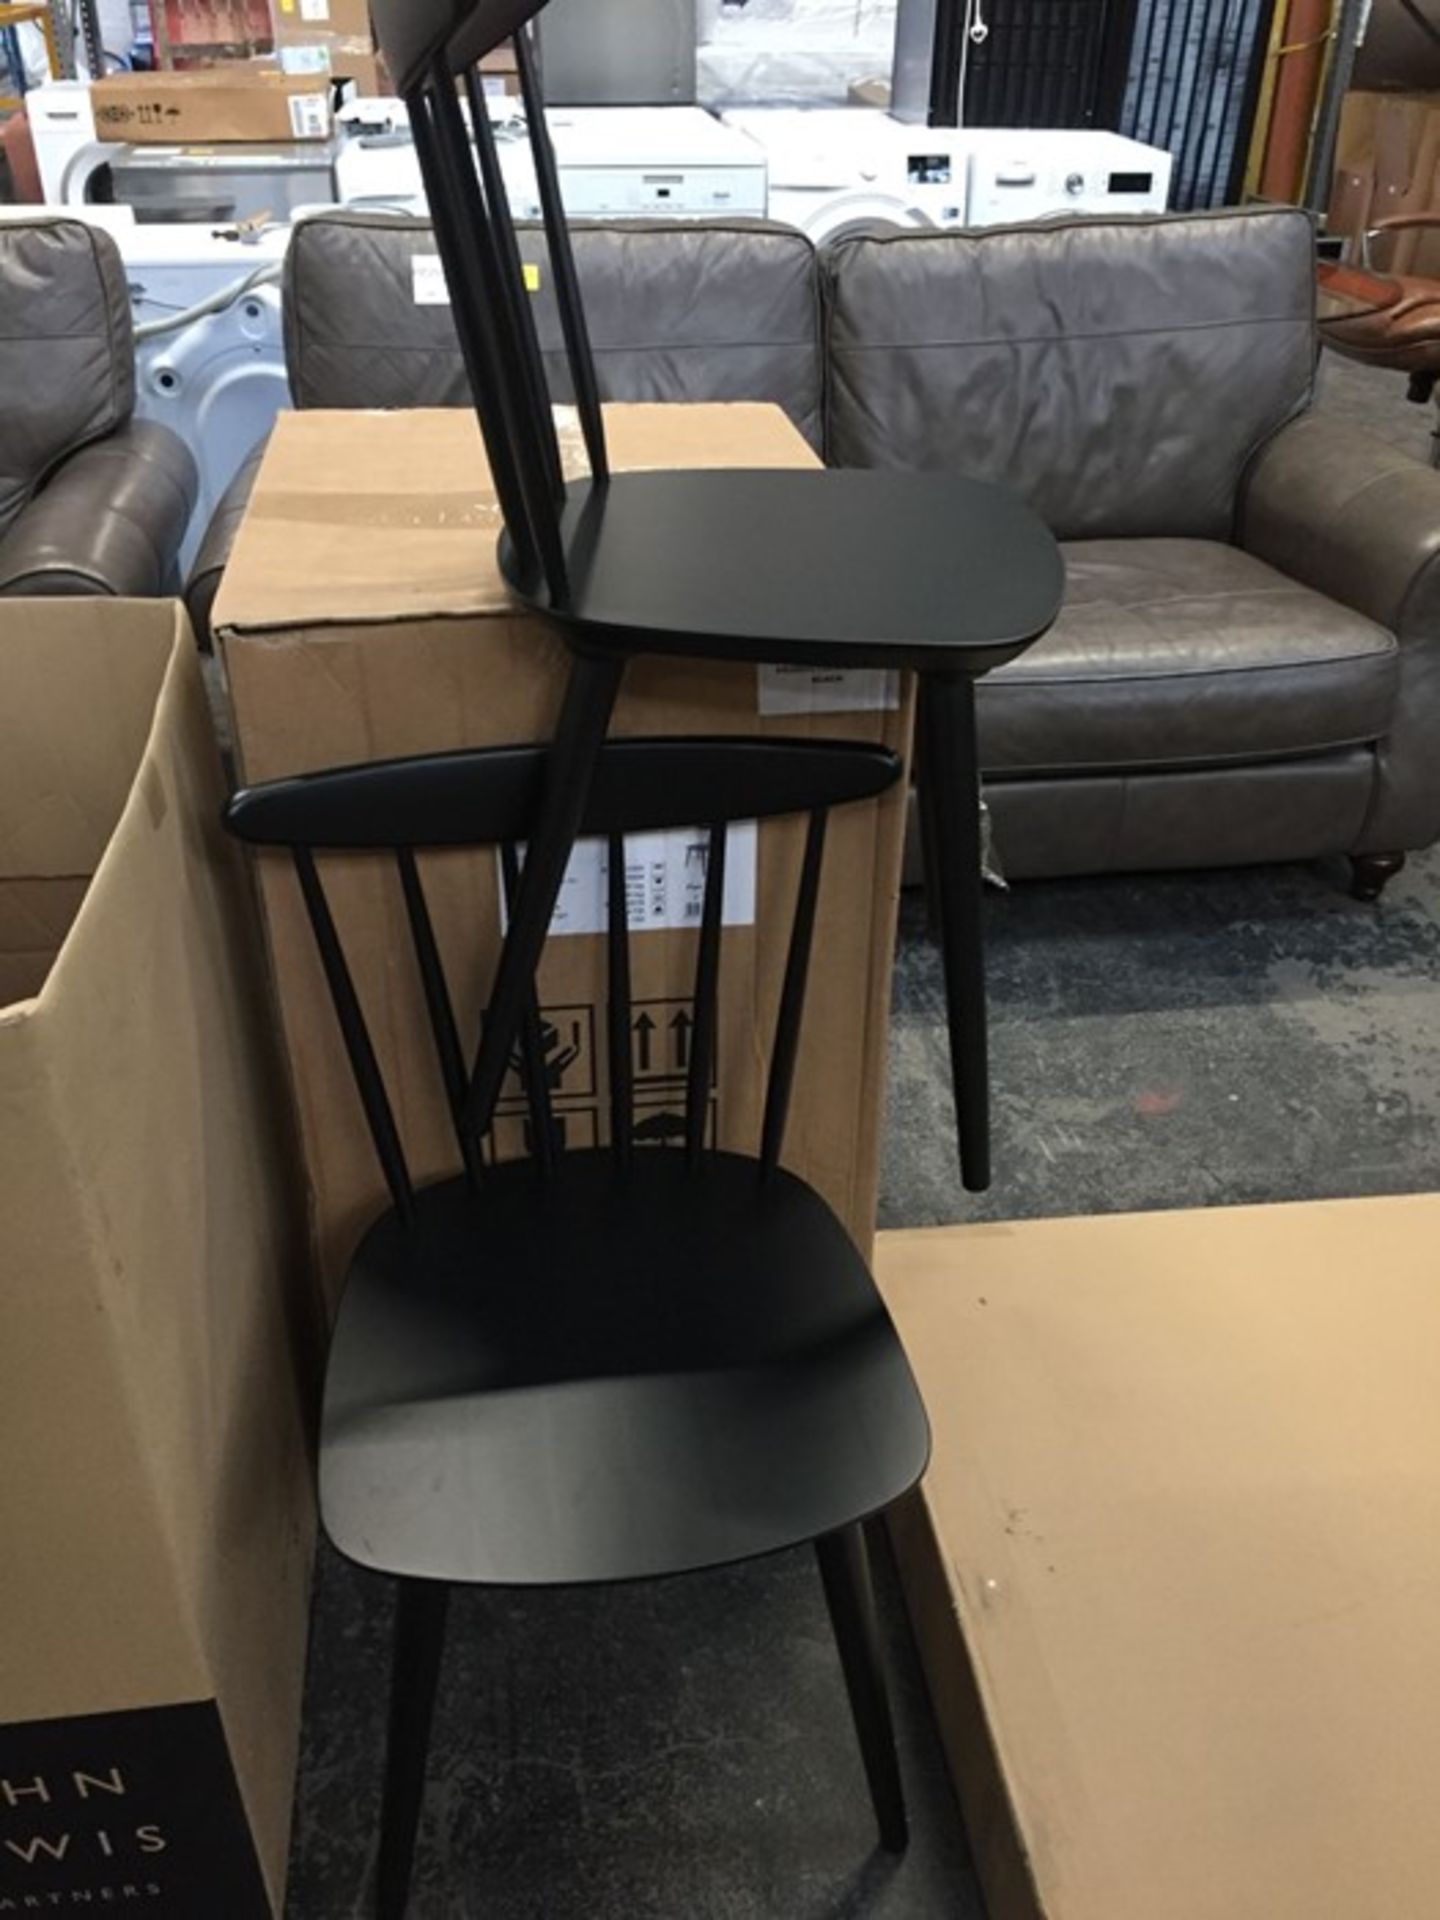 2 x JOHN LEWIS SPINDLE CHAIRS IN BLACK *BACK LEFT LEGS ON BOTH CHAIRS ARE NOT ATTACHED*